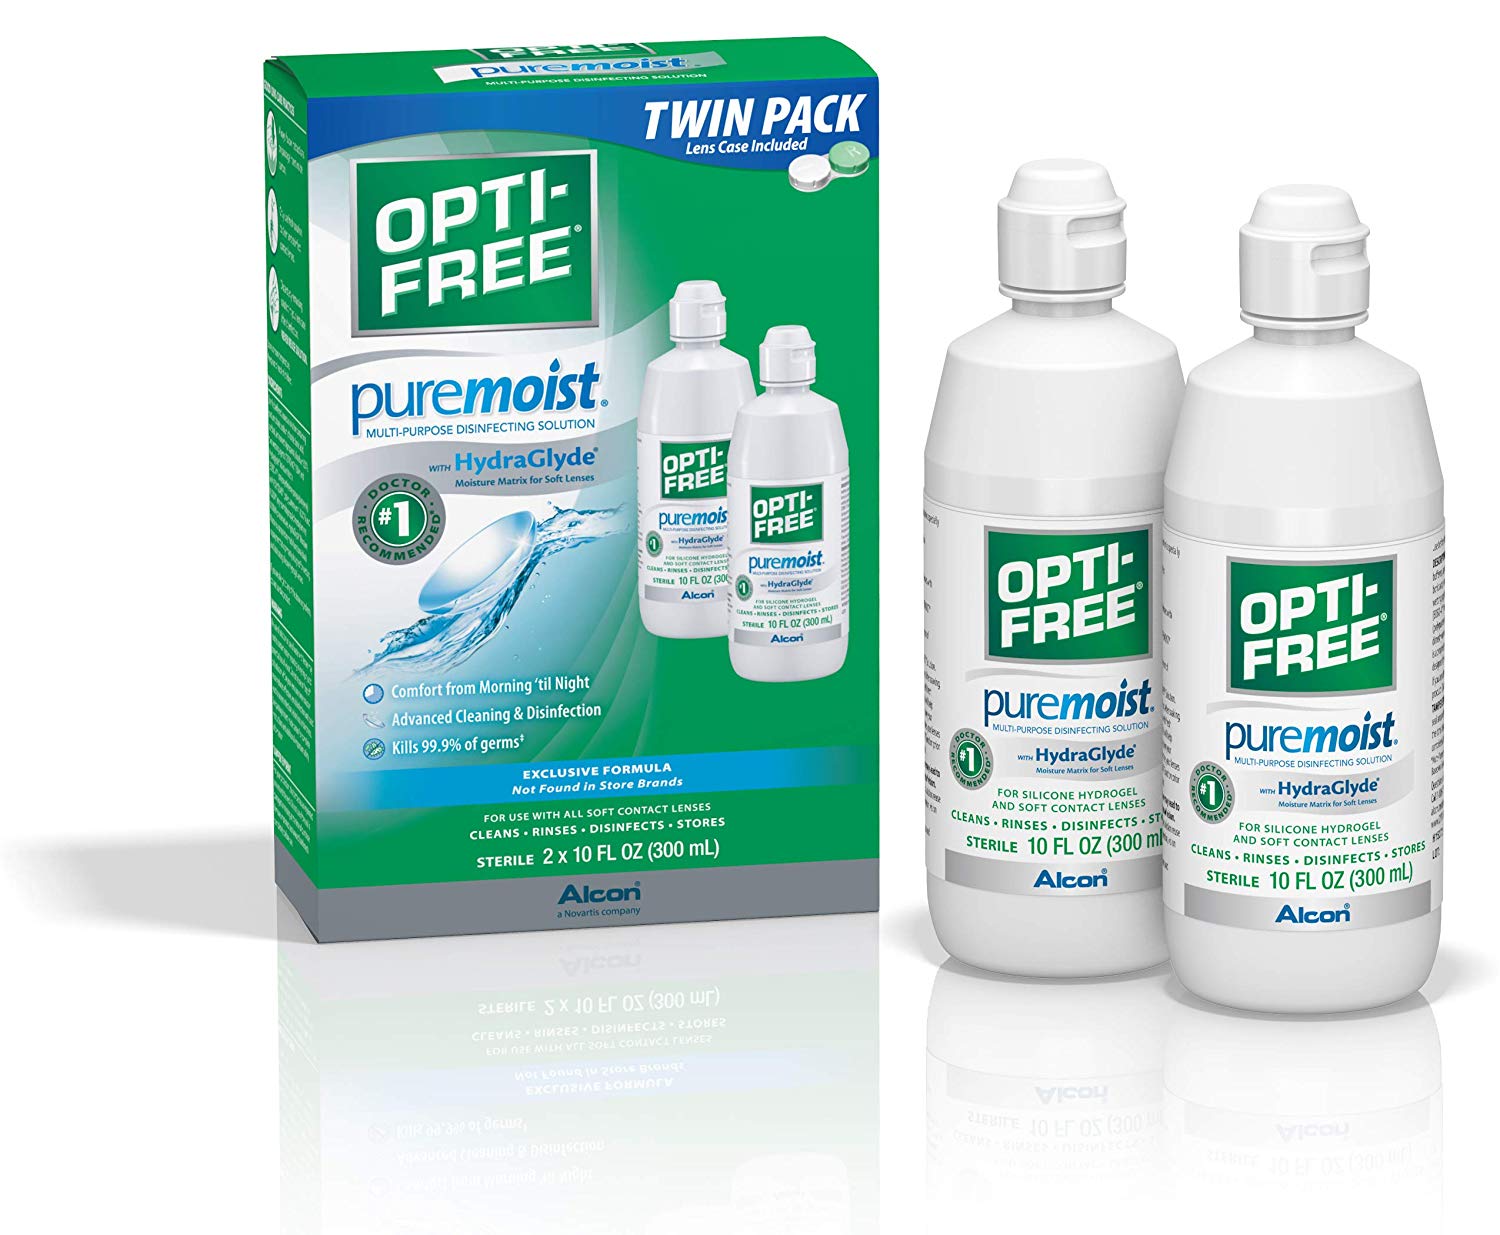 Best contact lens solutions in Singapore is  Alcon Opti-Free Pure Moist Multipurpose Disinfecting Solution, What solution do you use for contact lenses?, What is contact lens solution made of, How long can contacts stay in saline solution?,